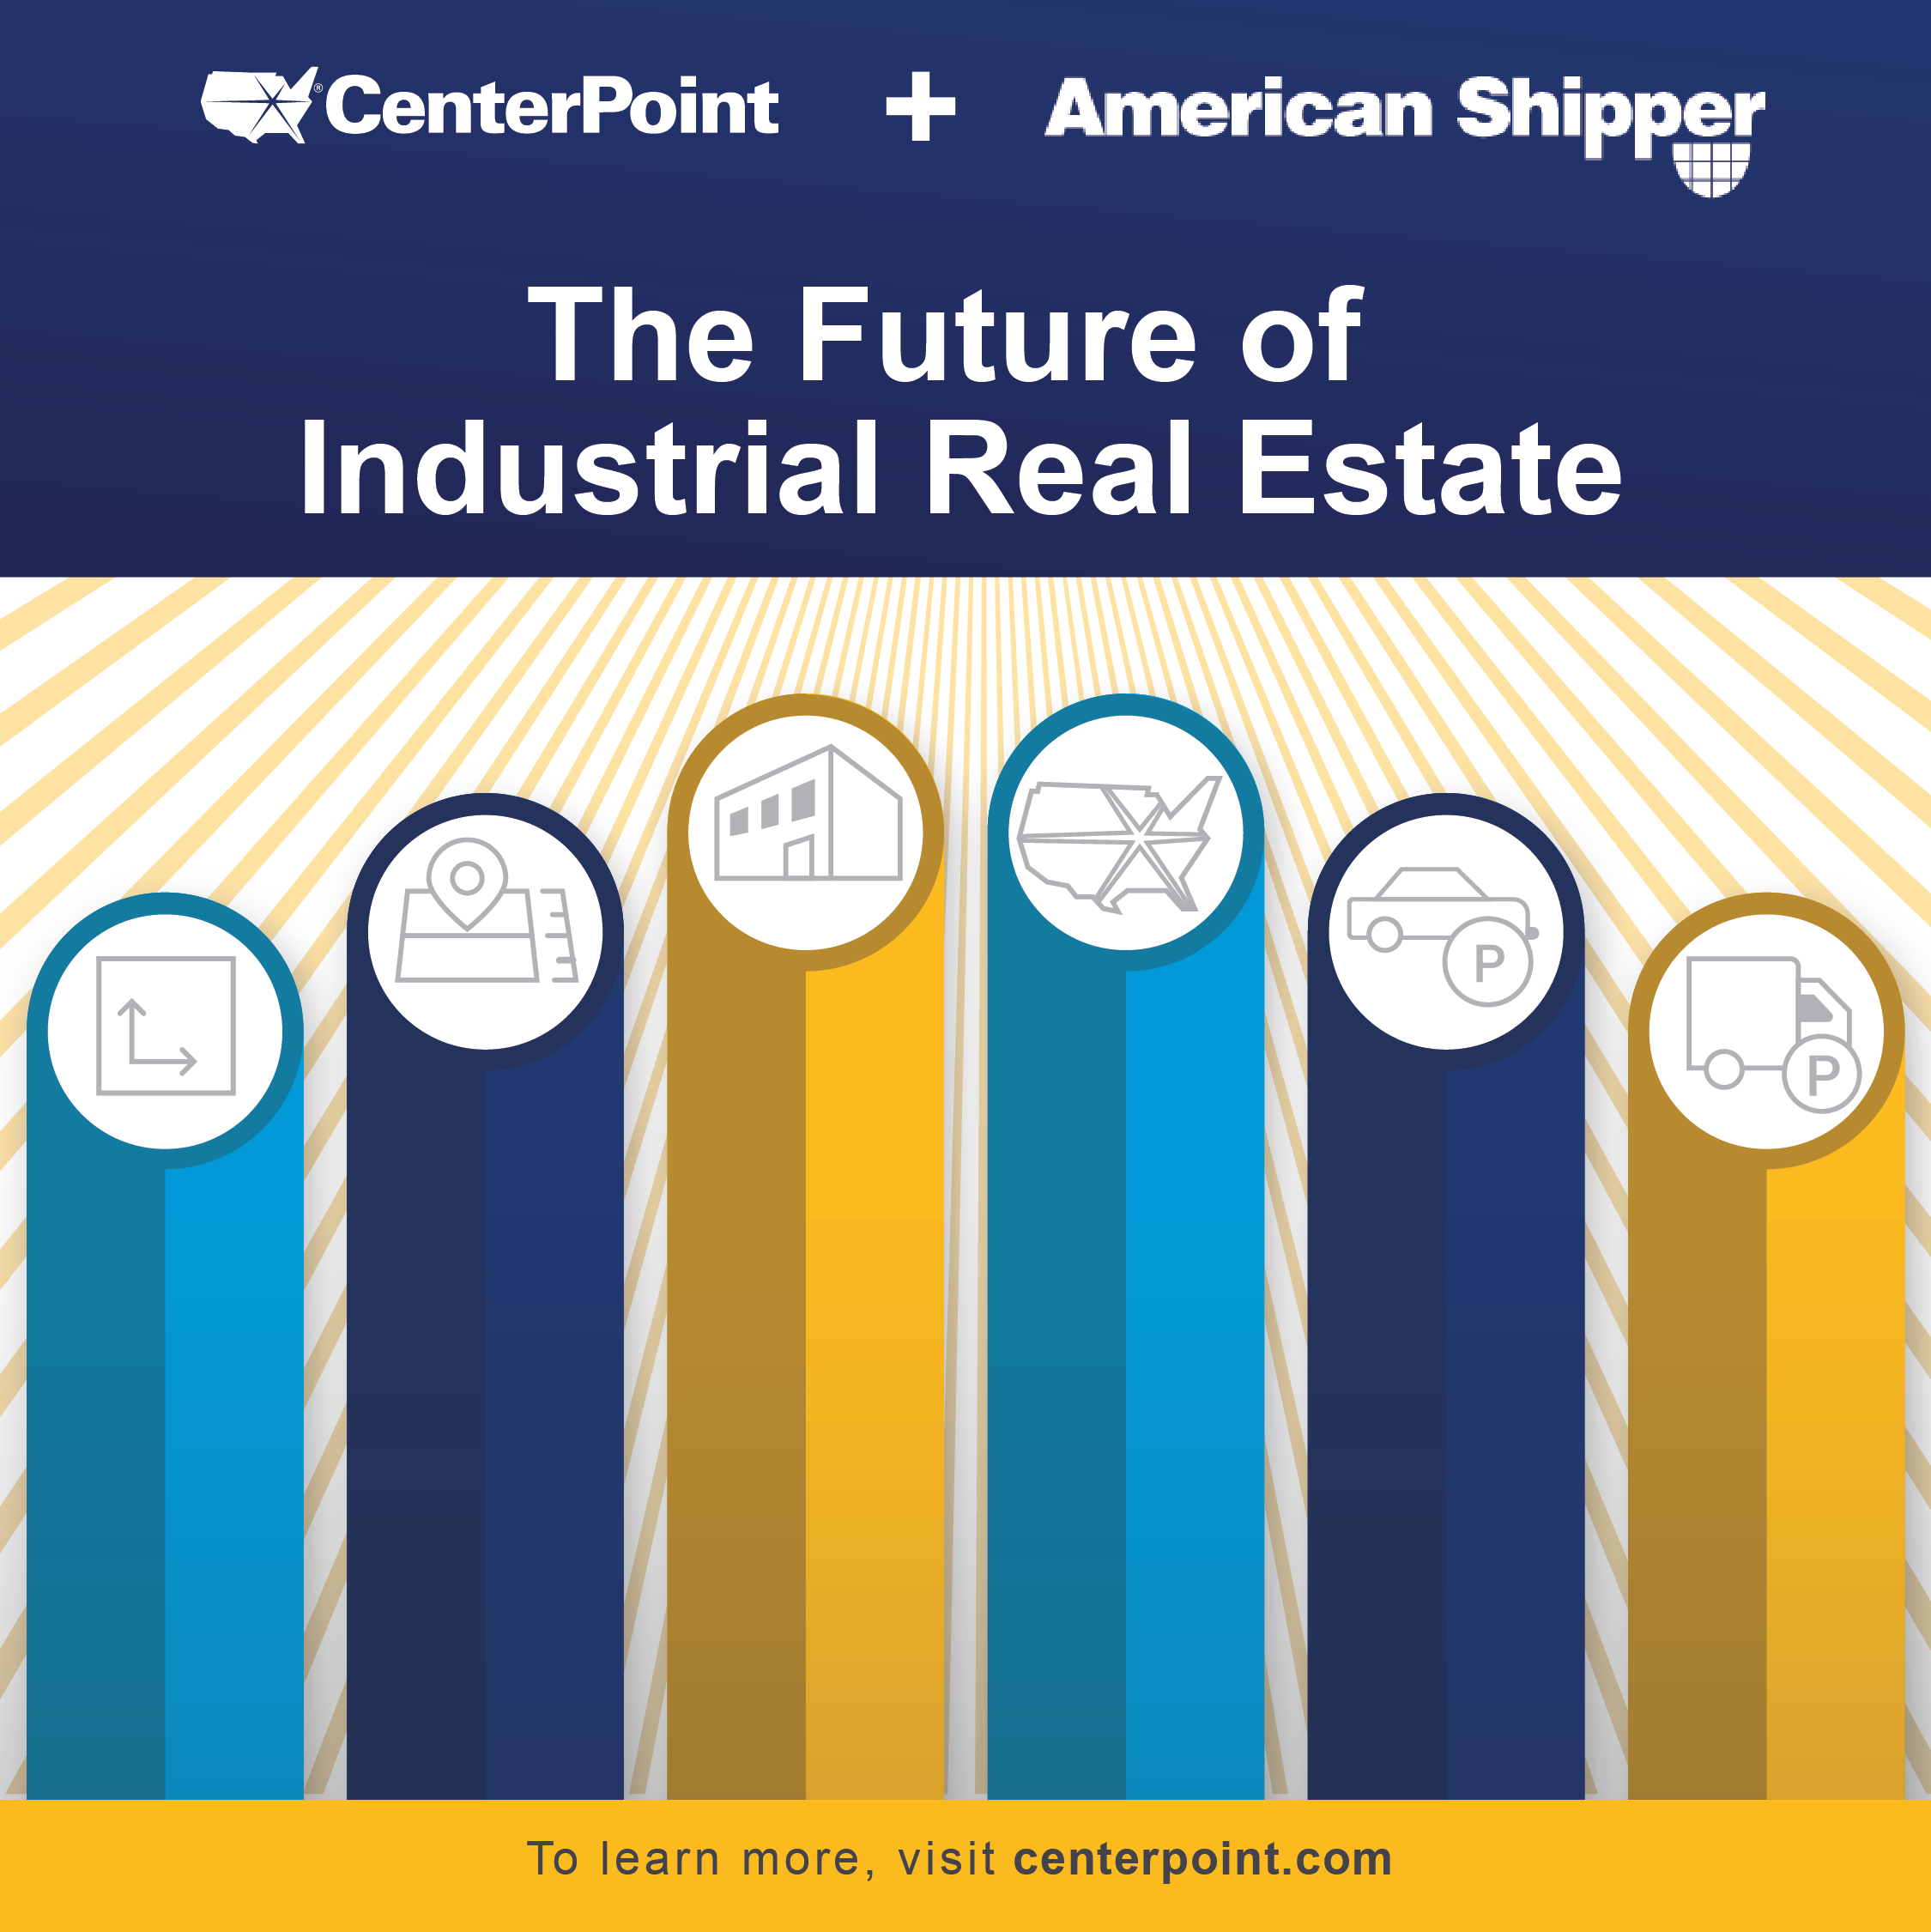 Last-Mile Reimagined: The Future of Industrial Real Estate in the E-commerce Era (Infographic) Image